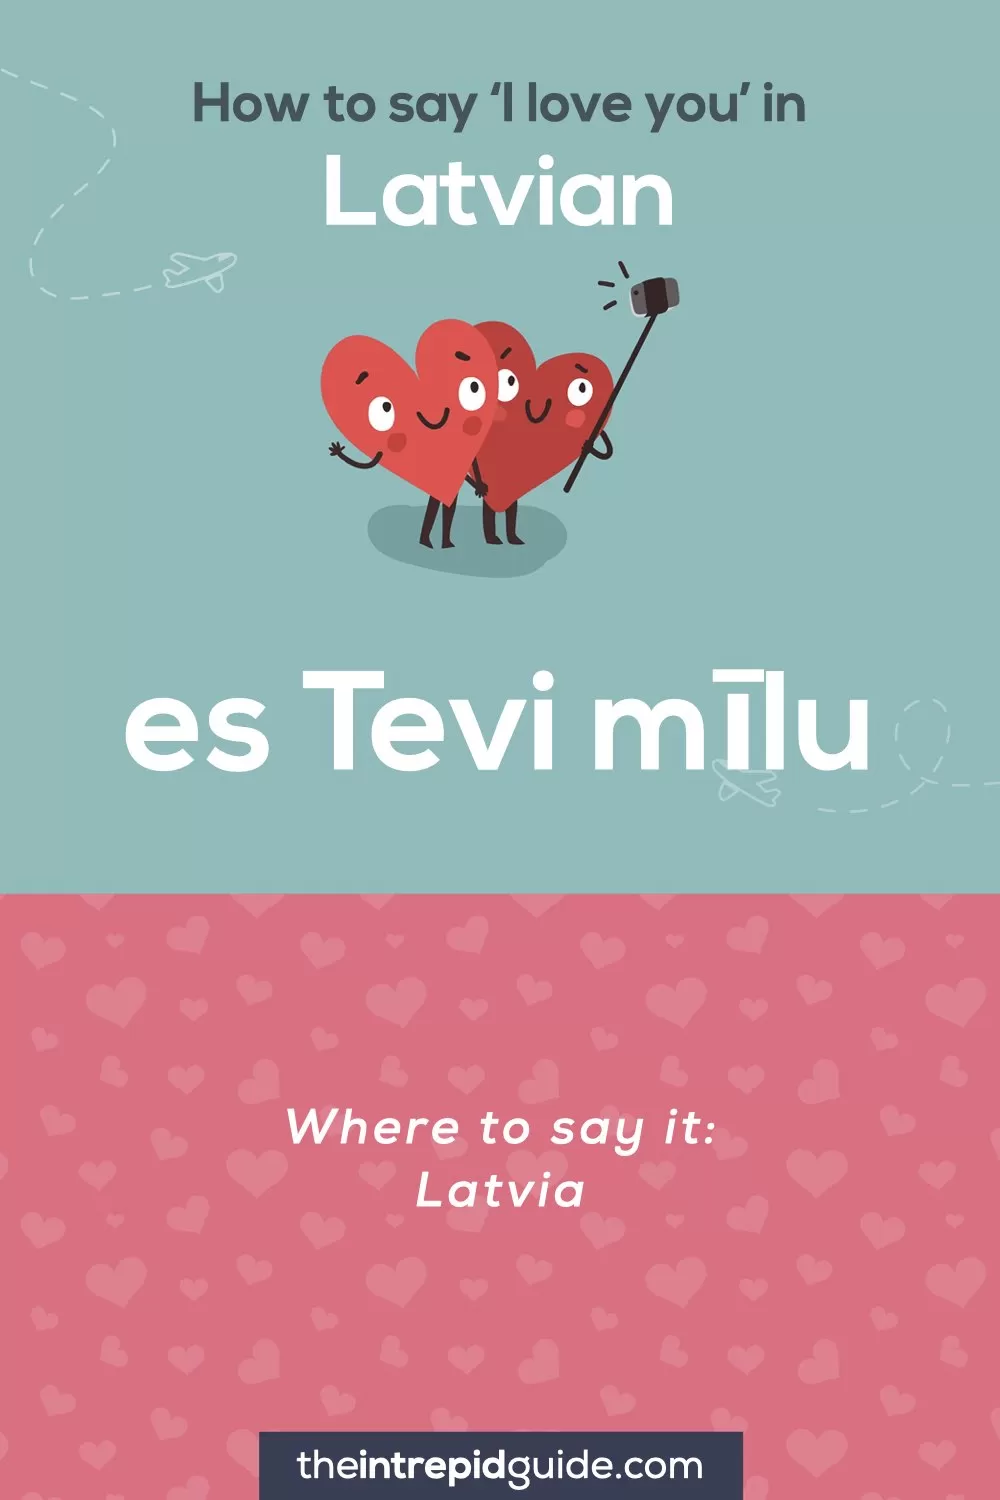 How to say I love you in different languages - Latvian - es Tevi mīlu